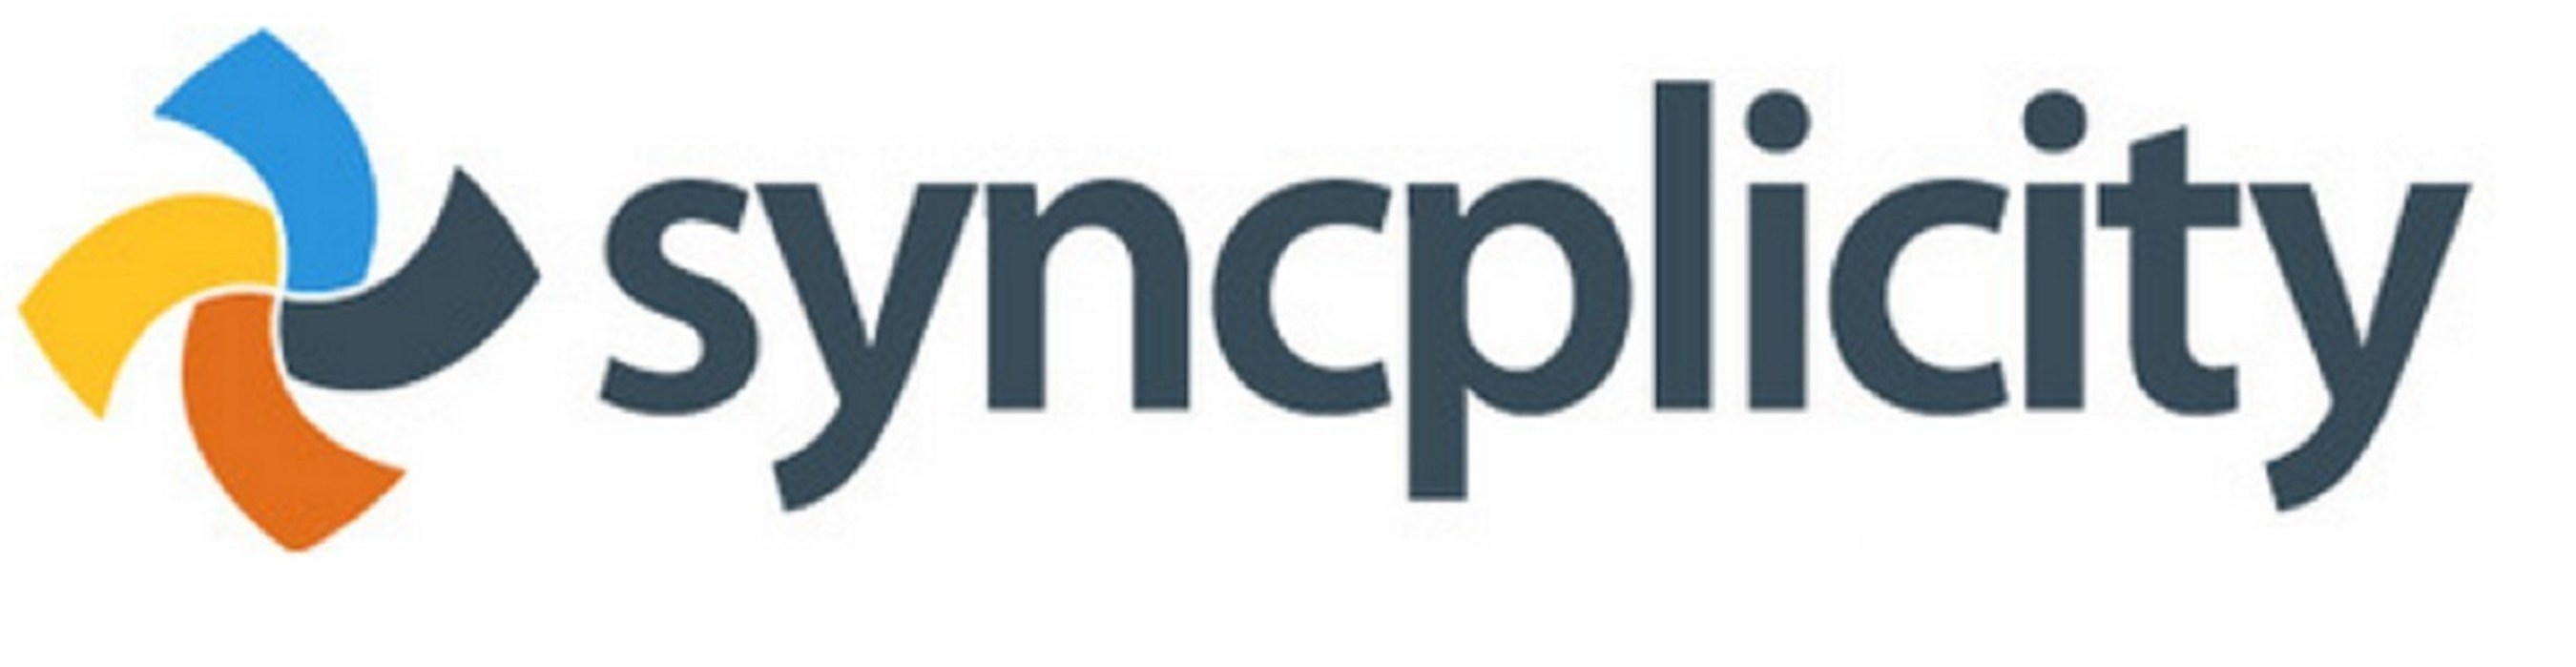 Syncplicity, a leading enterprise file sync and share provider